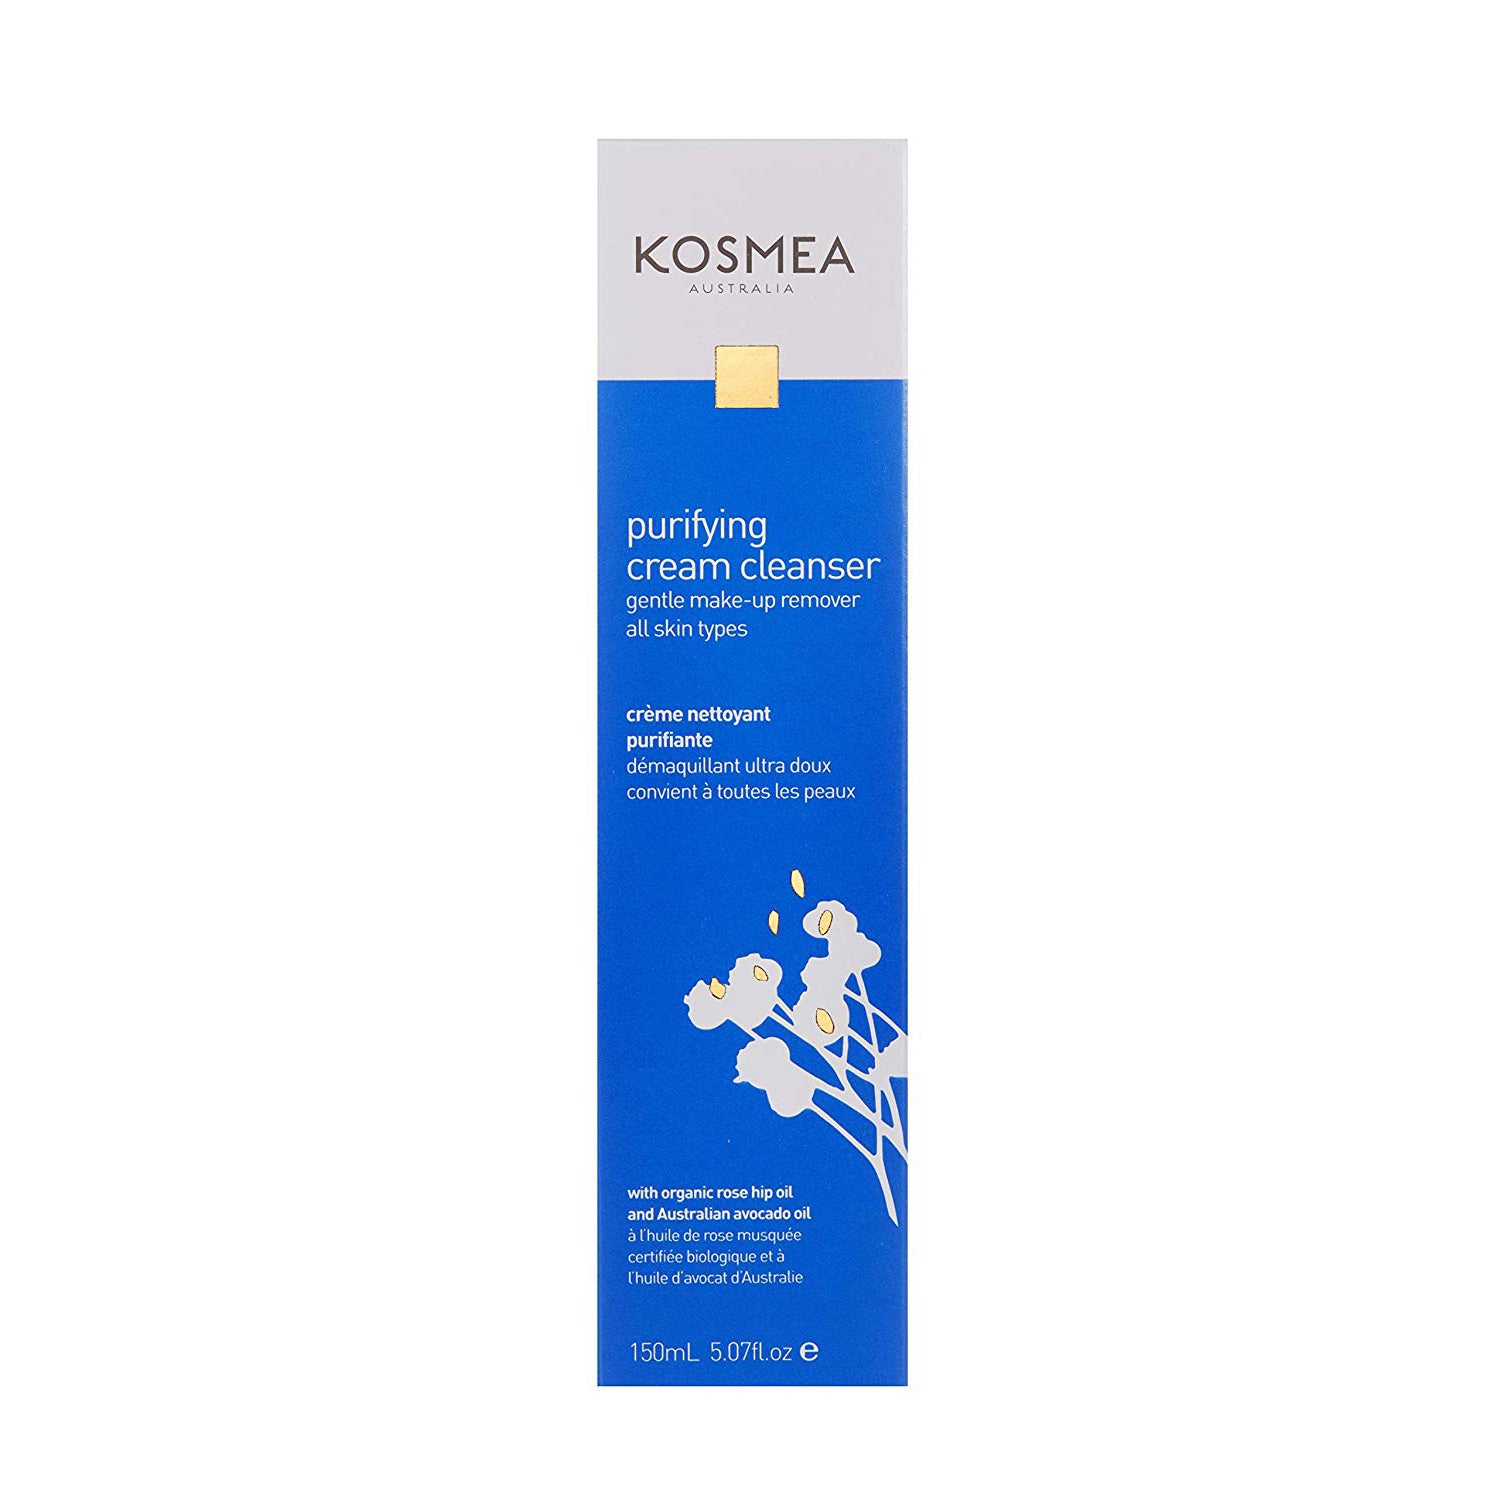 Kosmea Purifying Cream Cleanser 150ml Packaging Front View